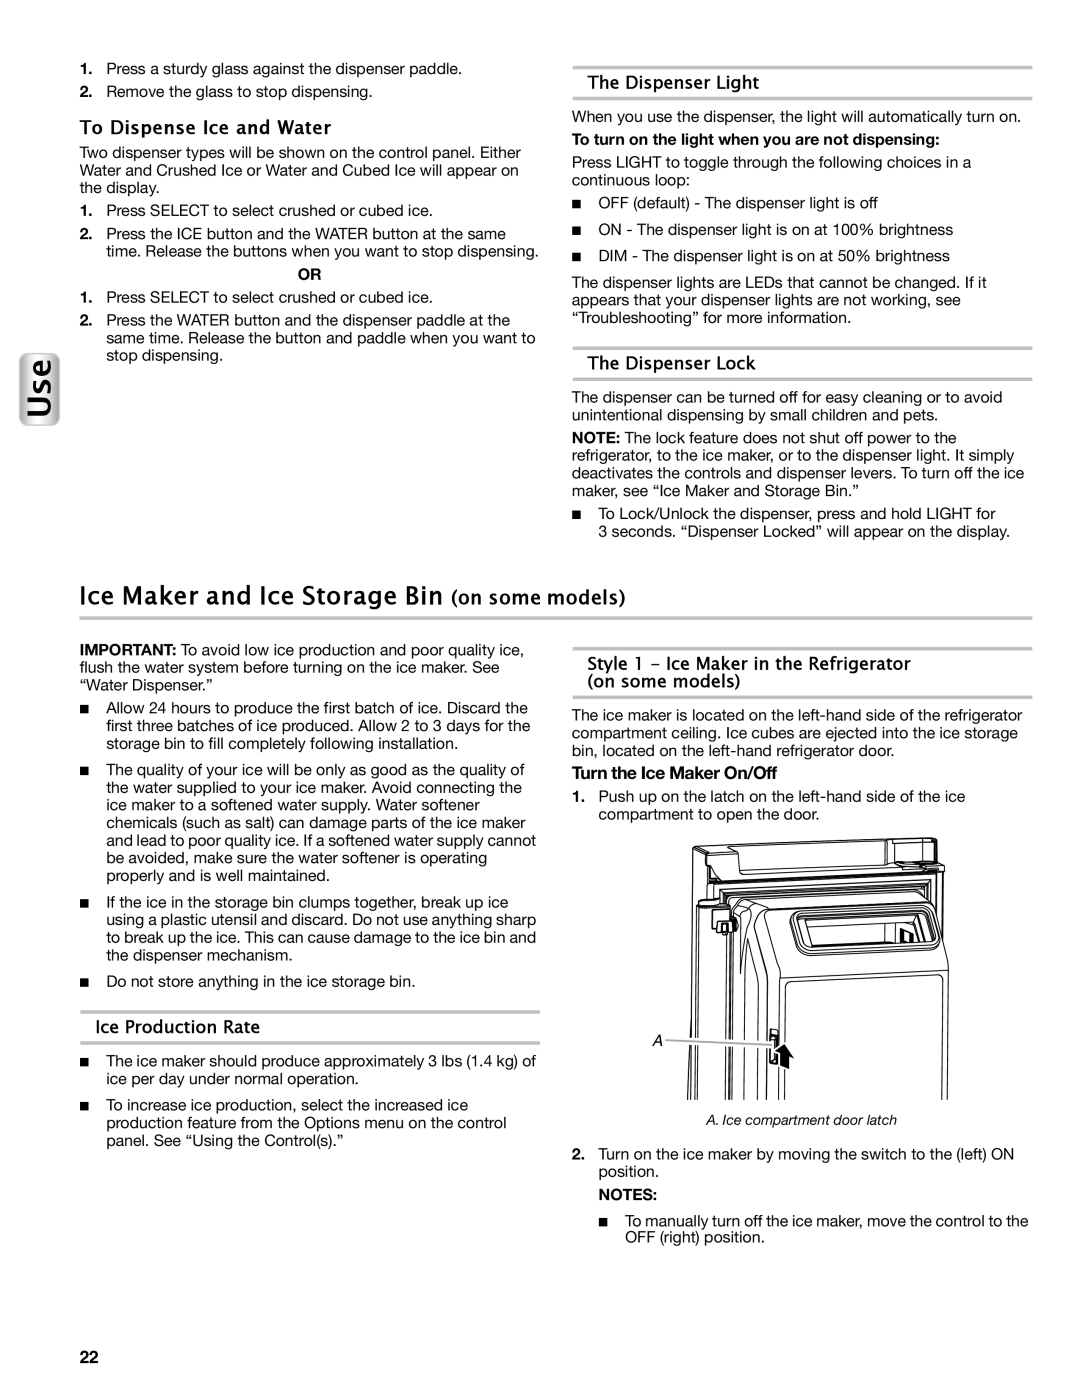 Maytag W10558104A manual Ice Maker and Ice Storage Bin on some models, To Dispense Ice and Water, The Dispenser Light 